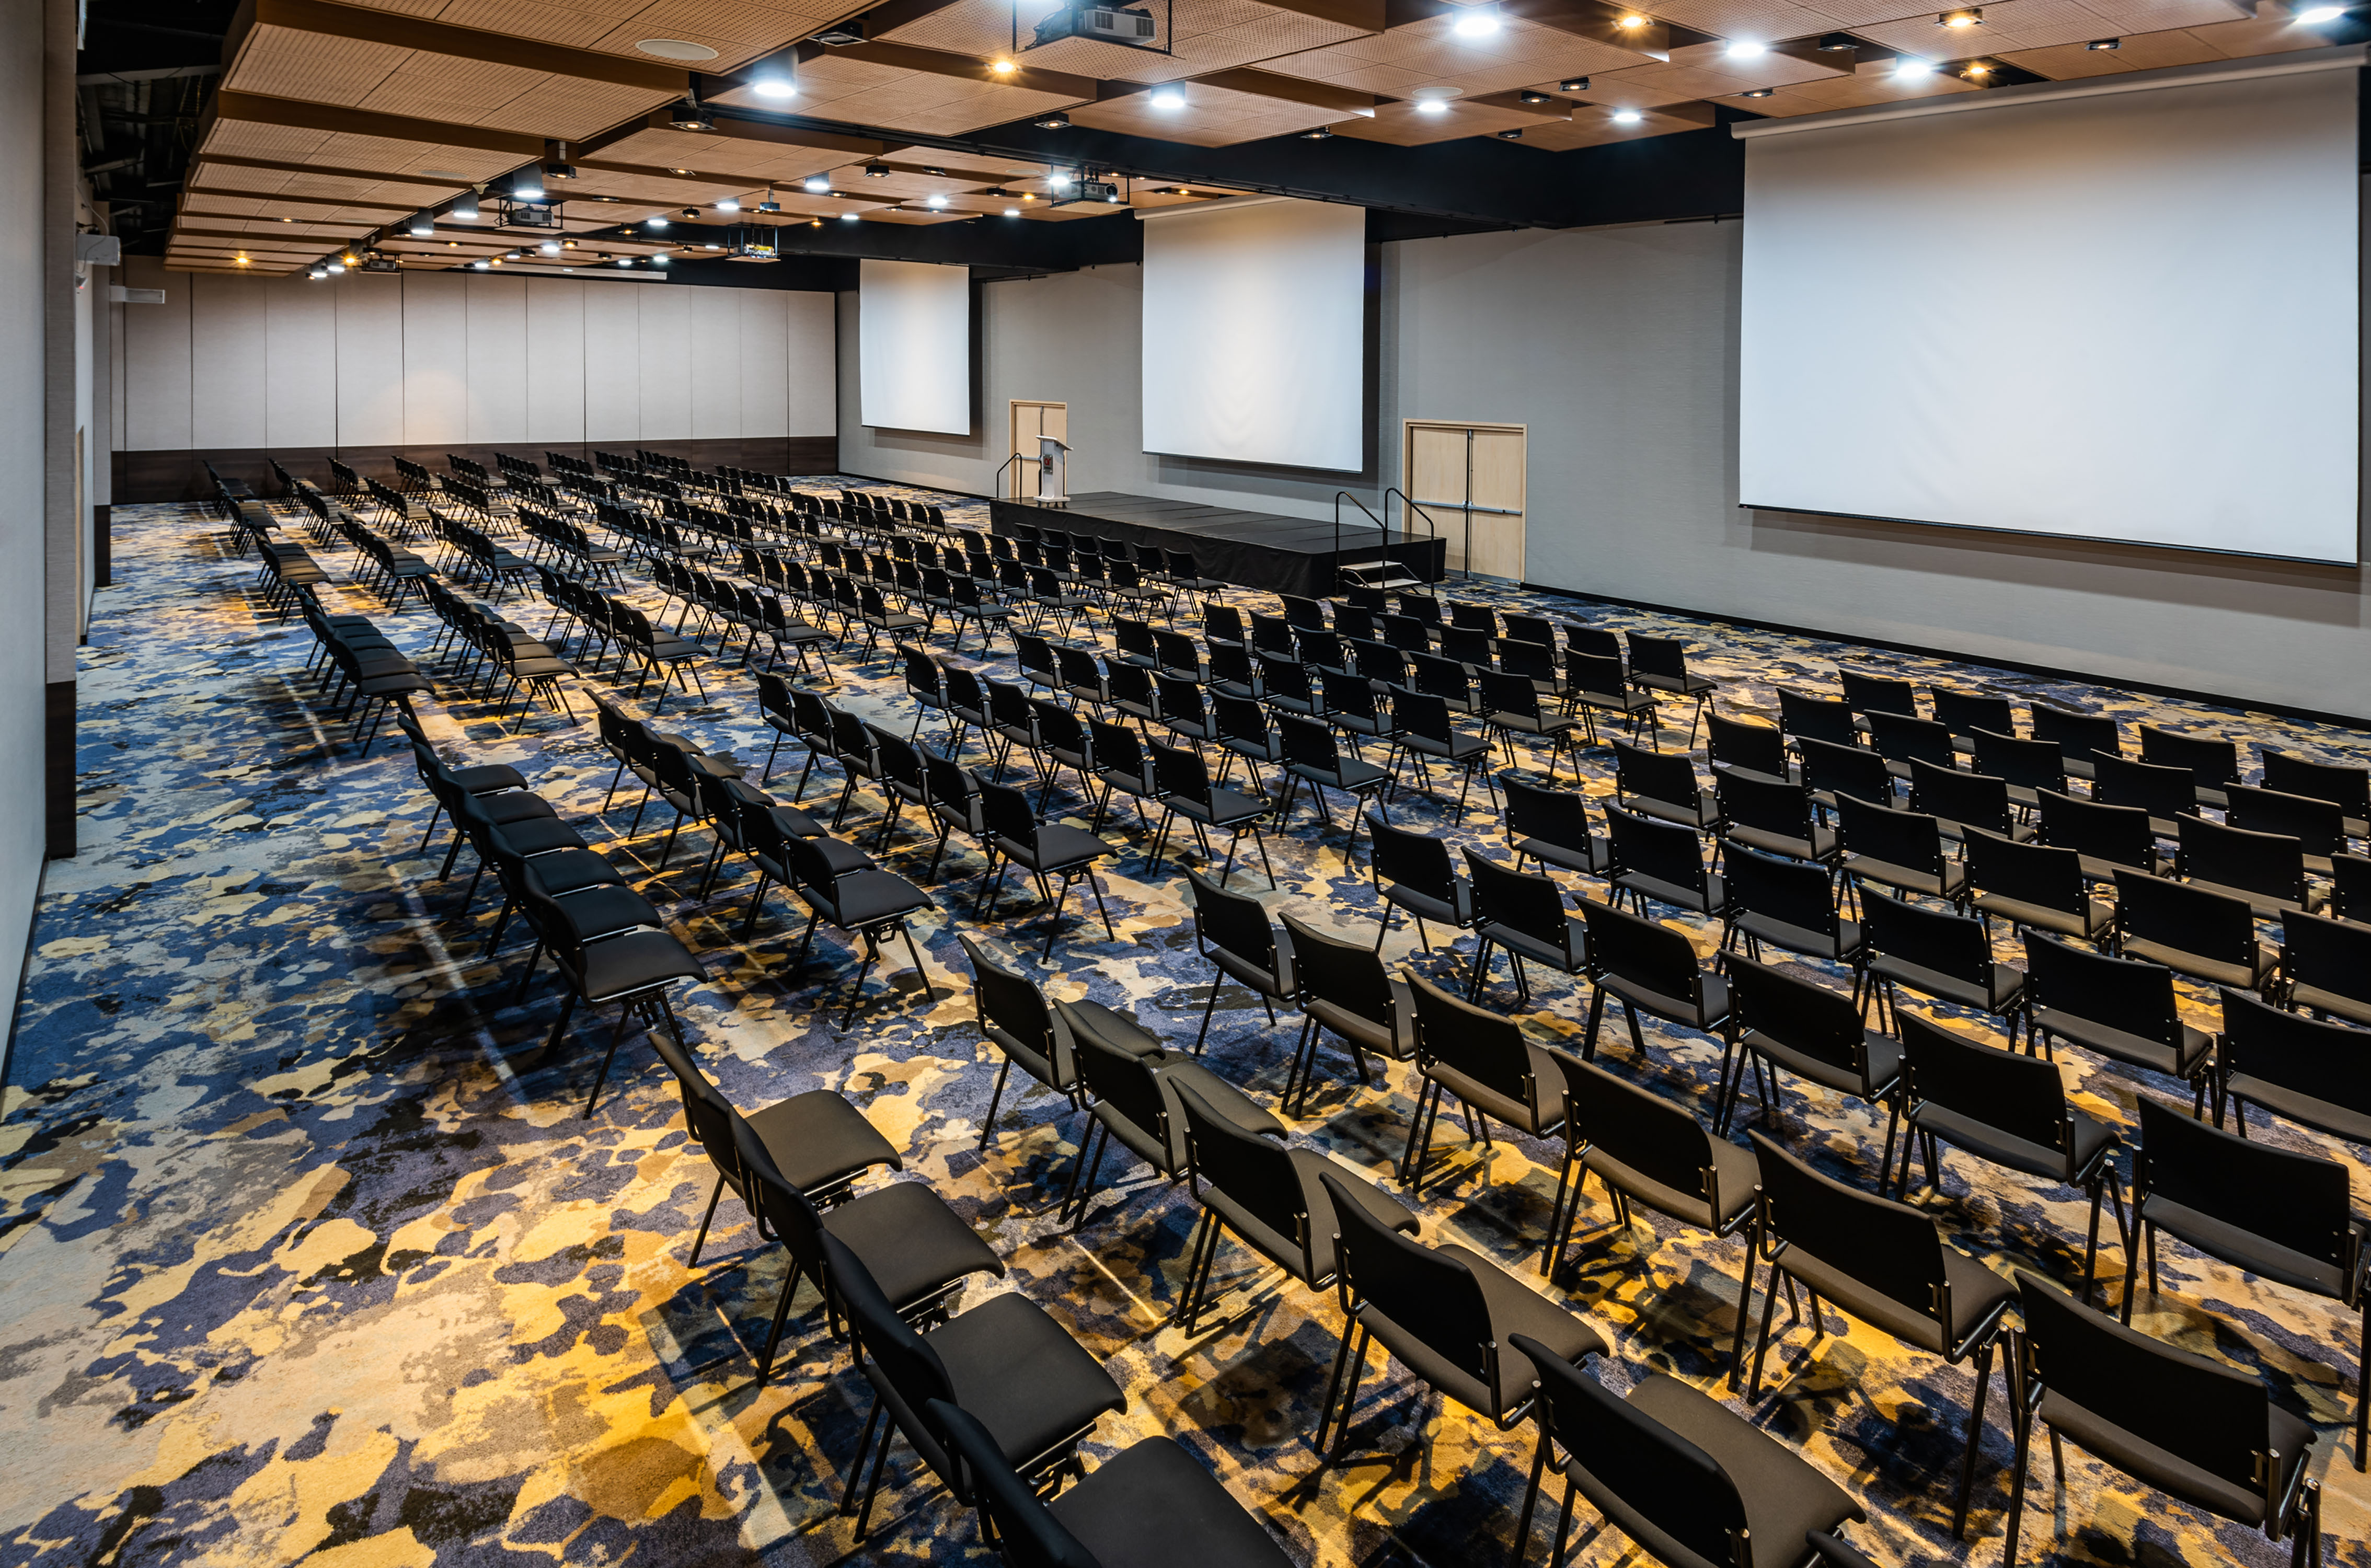 Large Meeting Room Setup Theater Style with Three Projection Screens